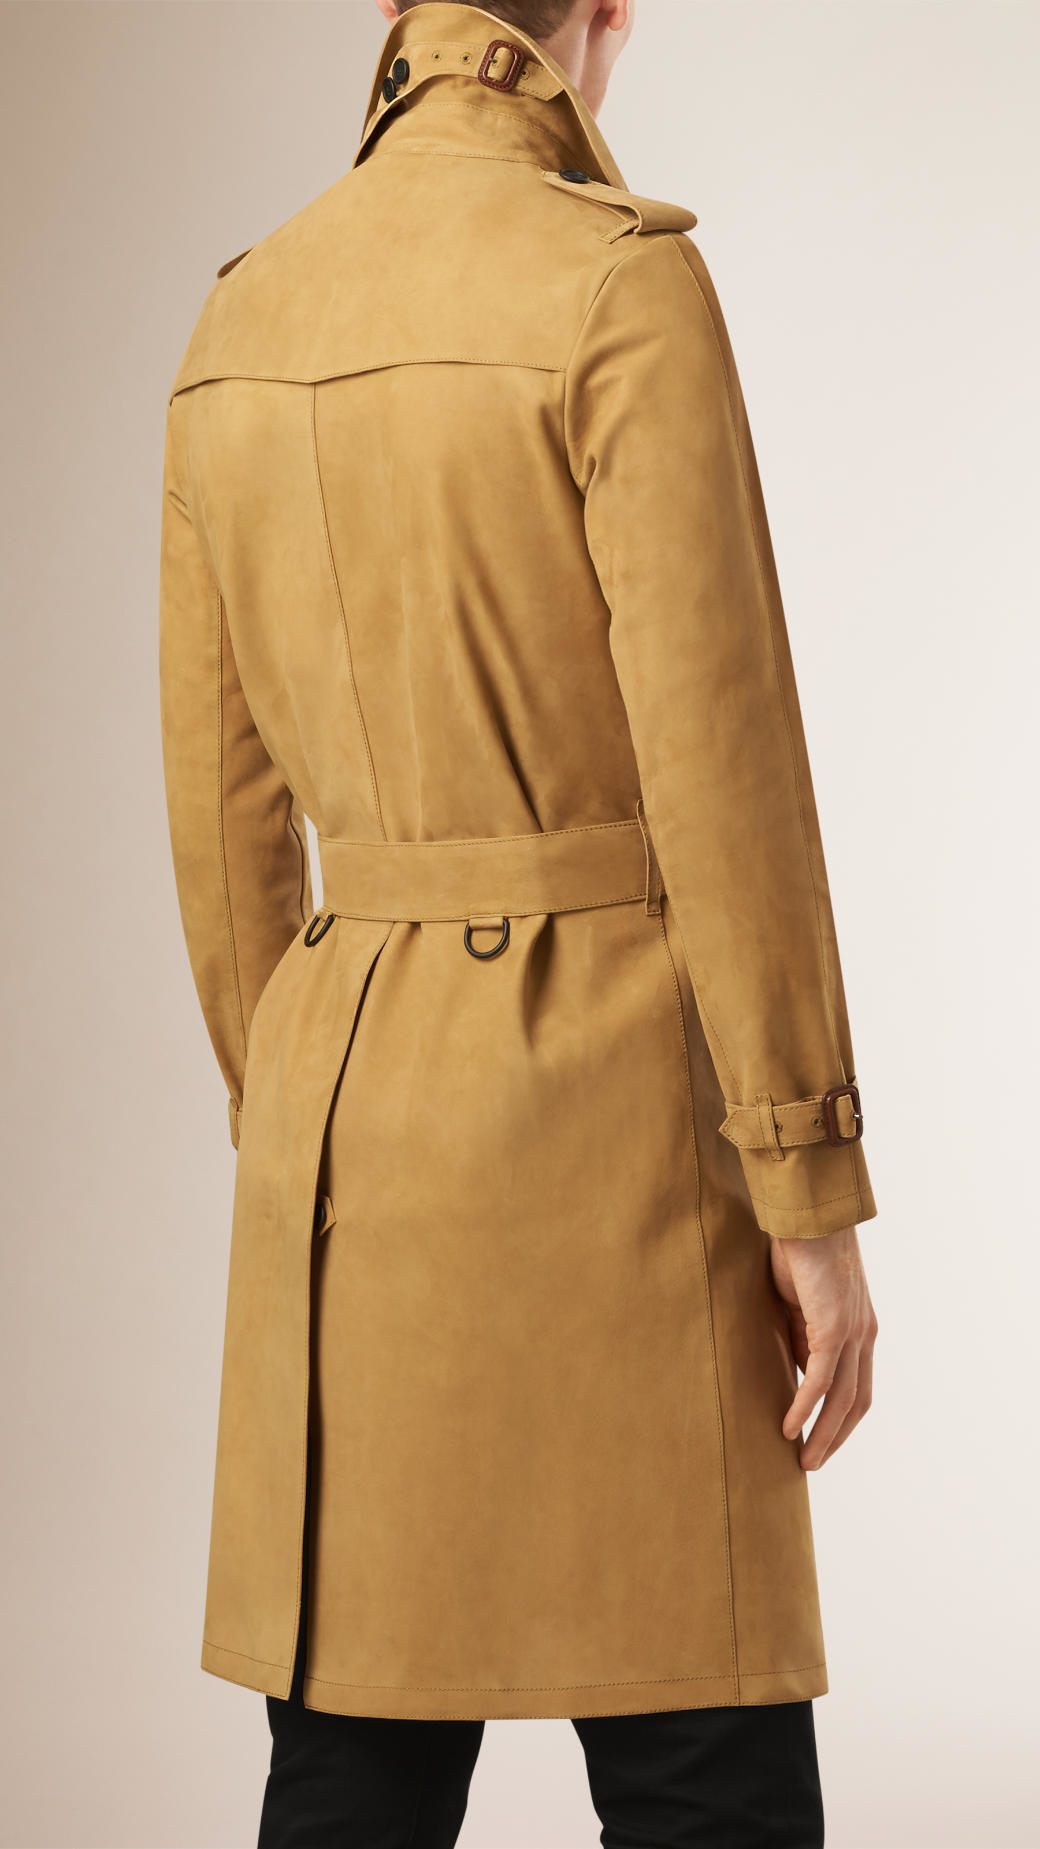 Burberry Suede Trench Coat in Tan (Brown) for Men - Lyst